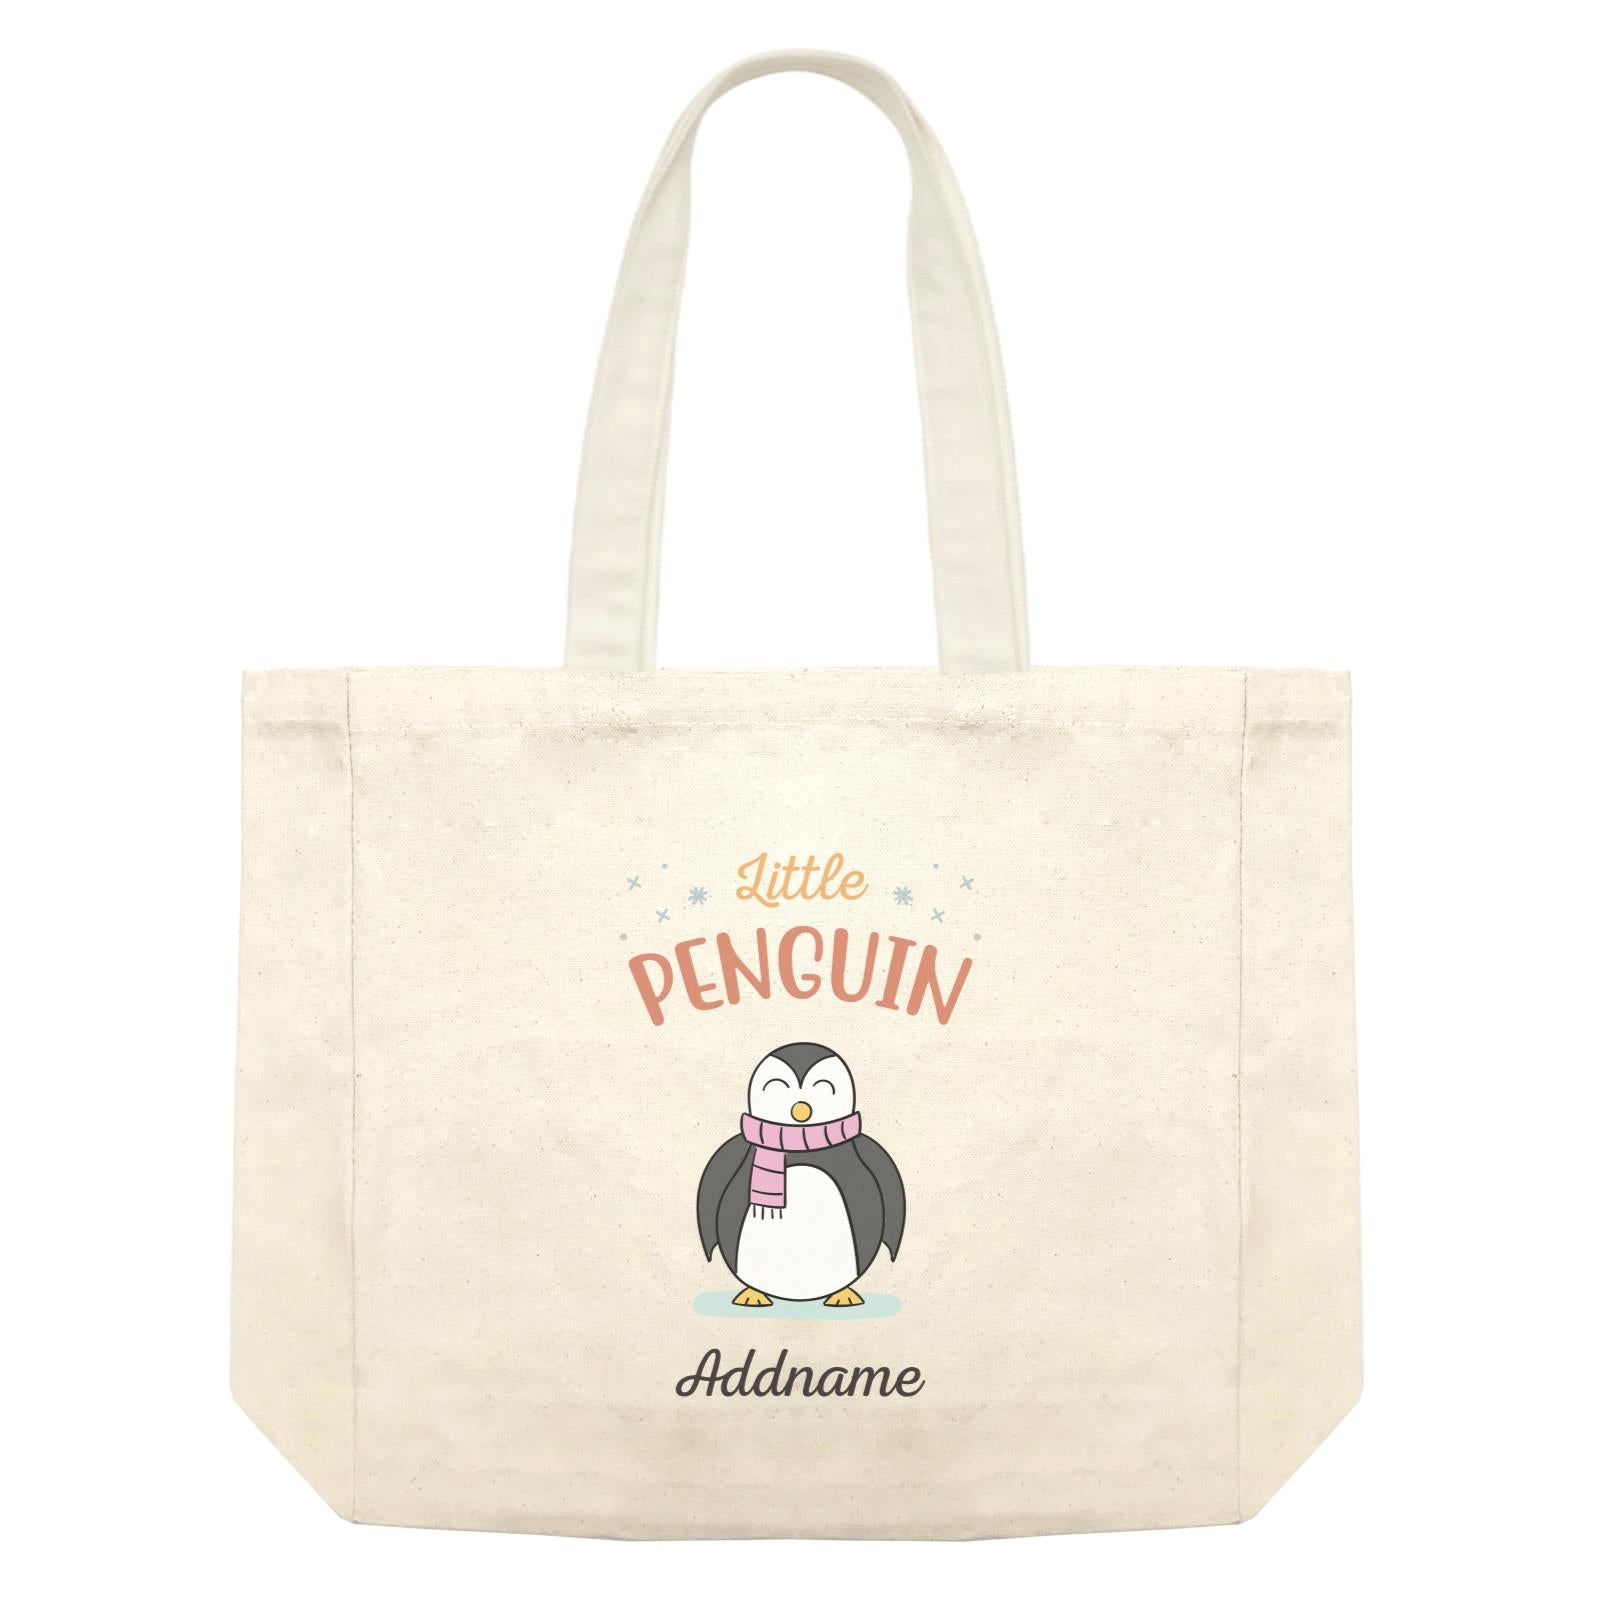 Penguin Family Little Penguin With Scarf Addname Shopping Bag